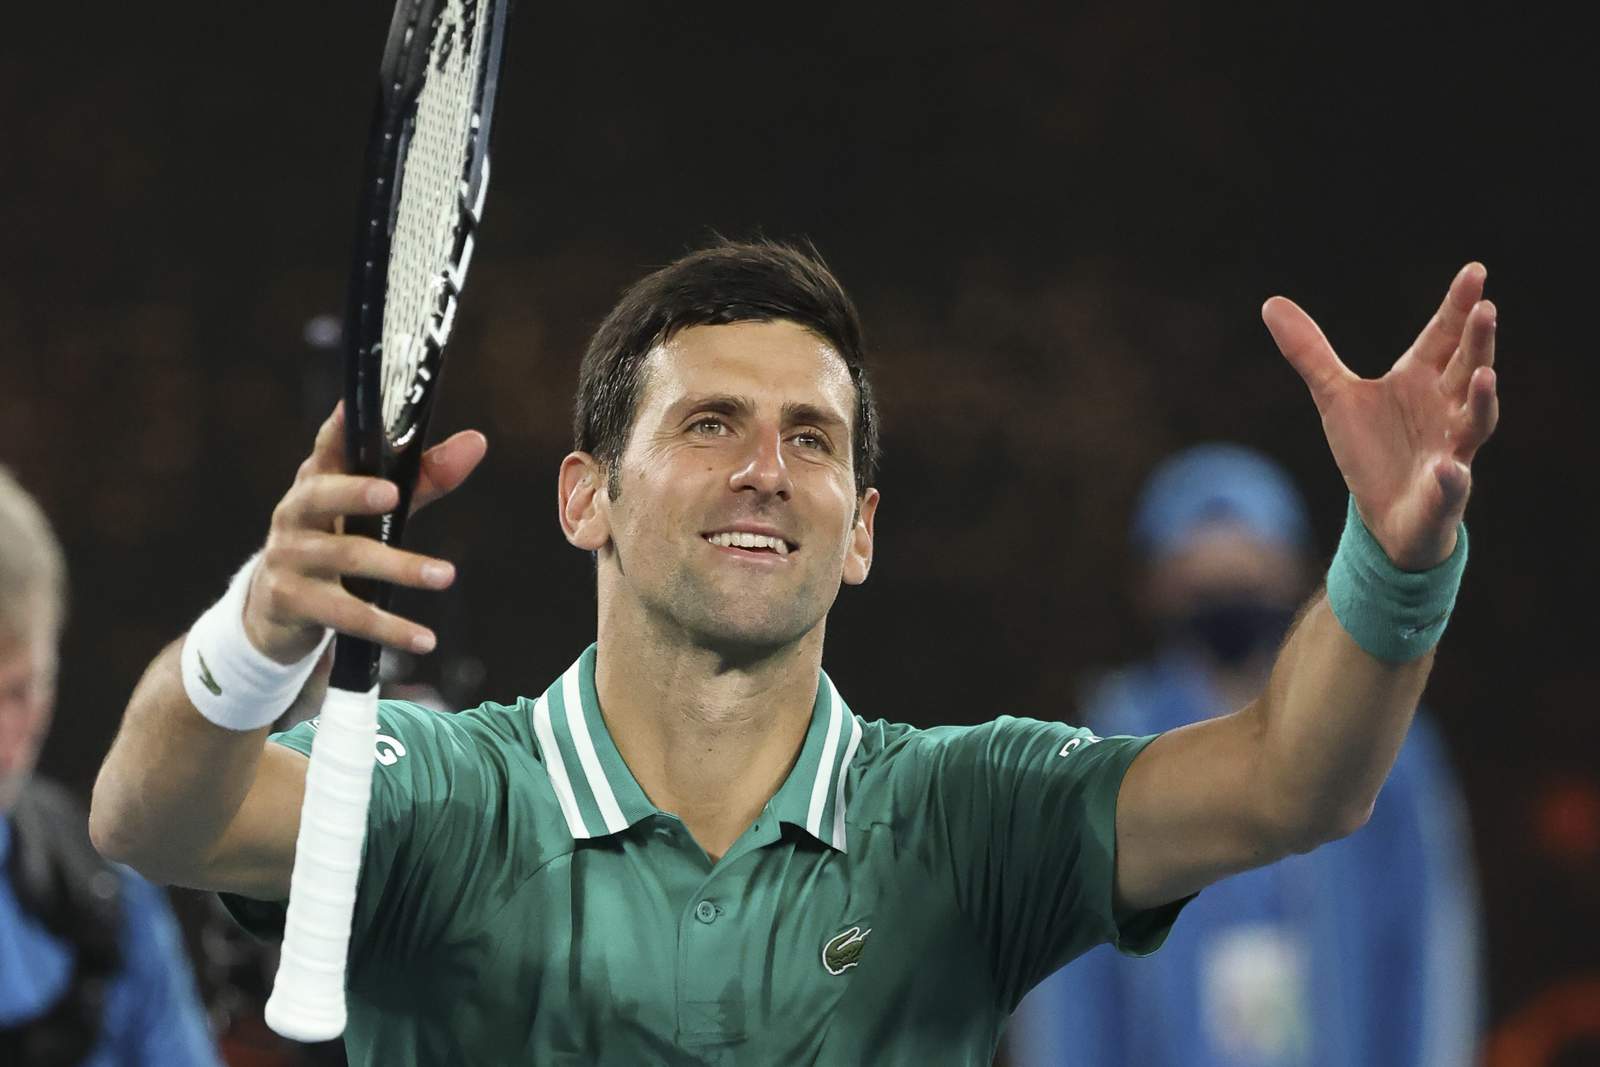 Djokovic: "makes my heart full" to see Aussie Open crowd